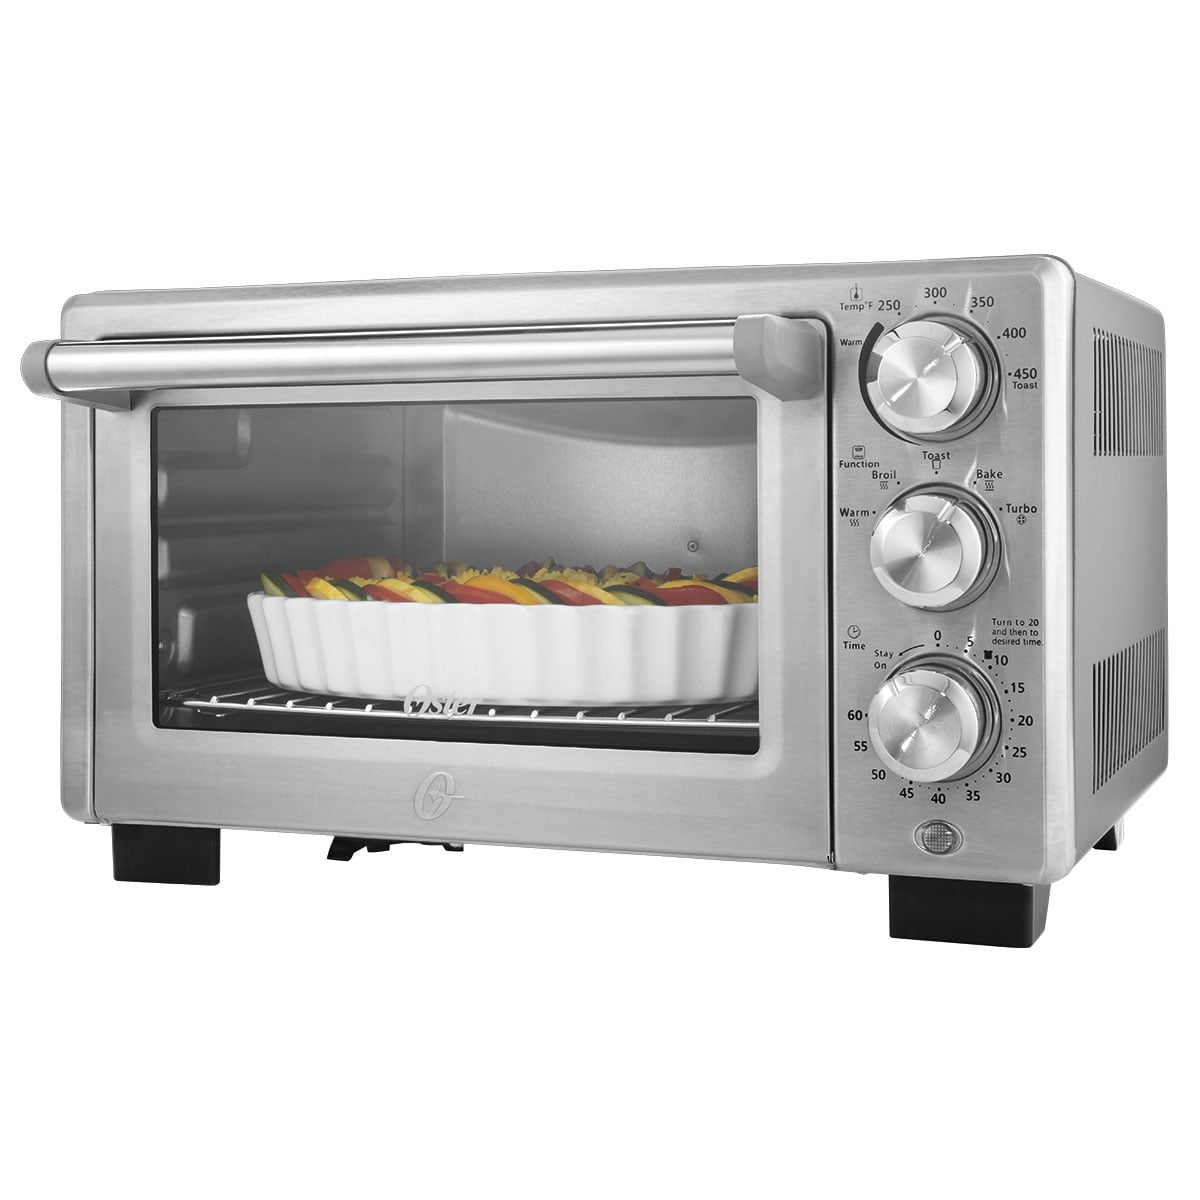 Oster Designed For Life Countertop Convection Toaster Oven Stainless Steel